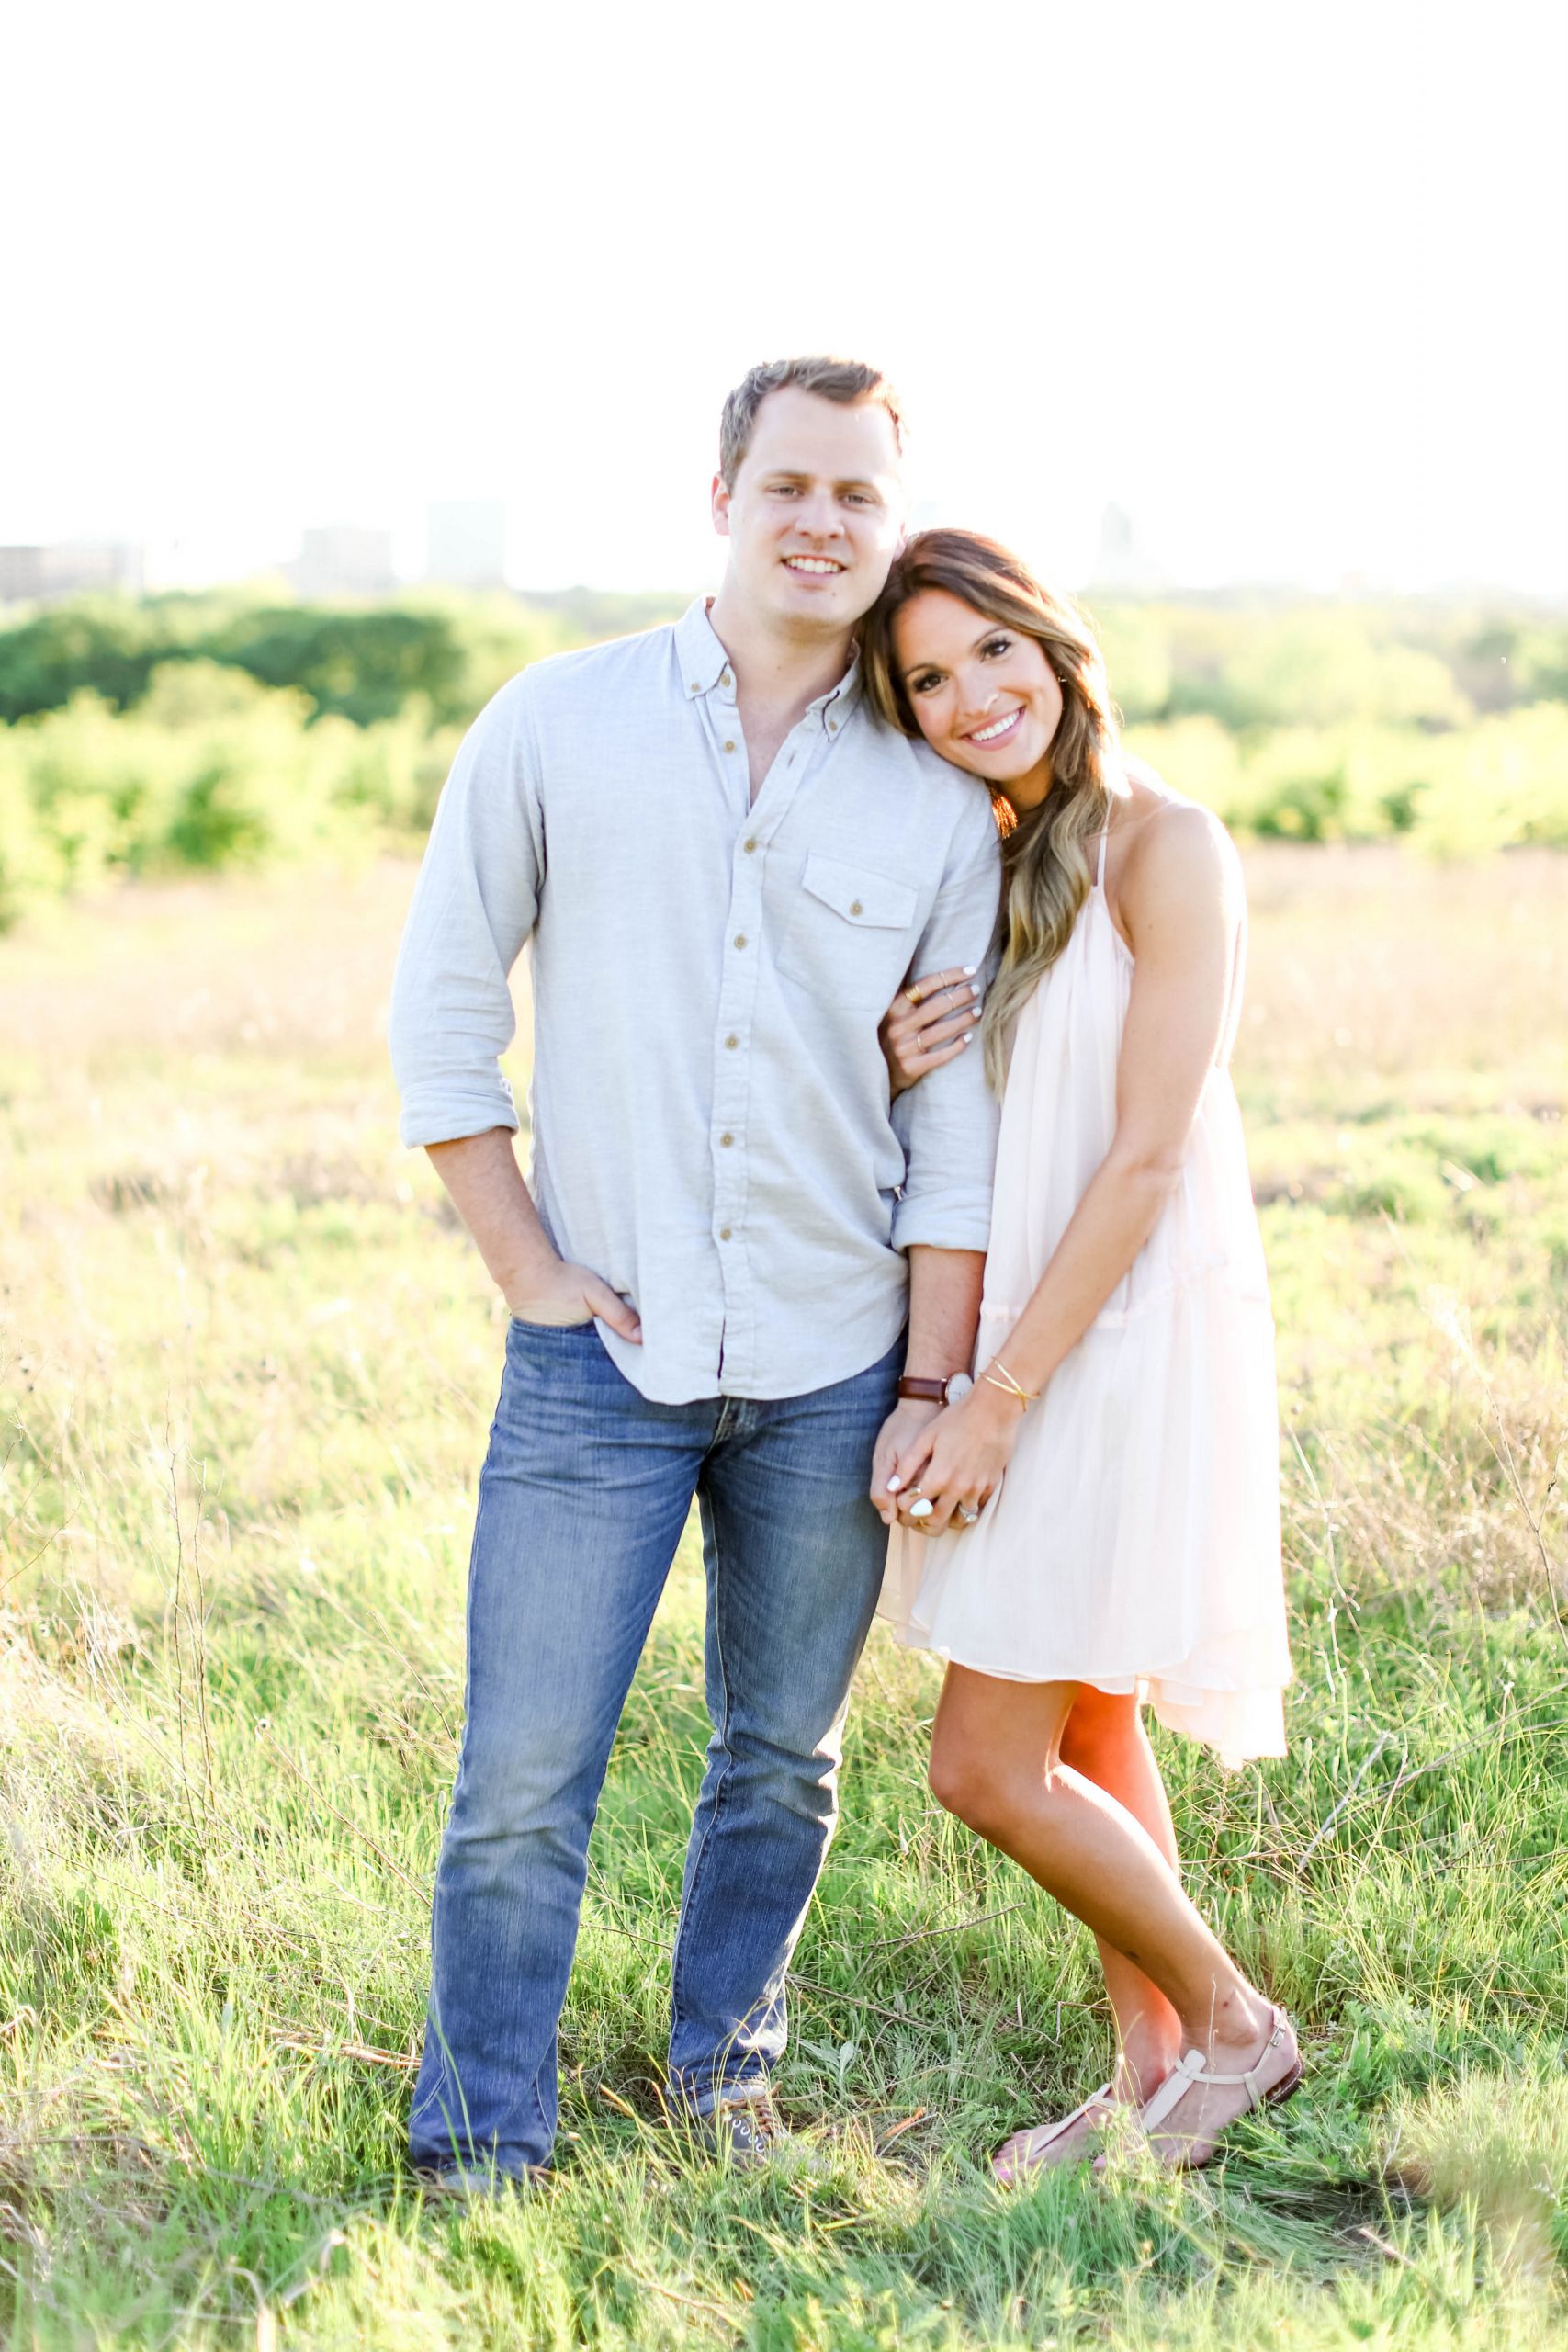 Engagement Photo Ideas For Summer
 what to wear for engagement pictures pt 1 Lauren Kay Sims